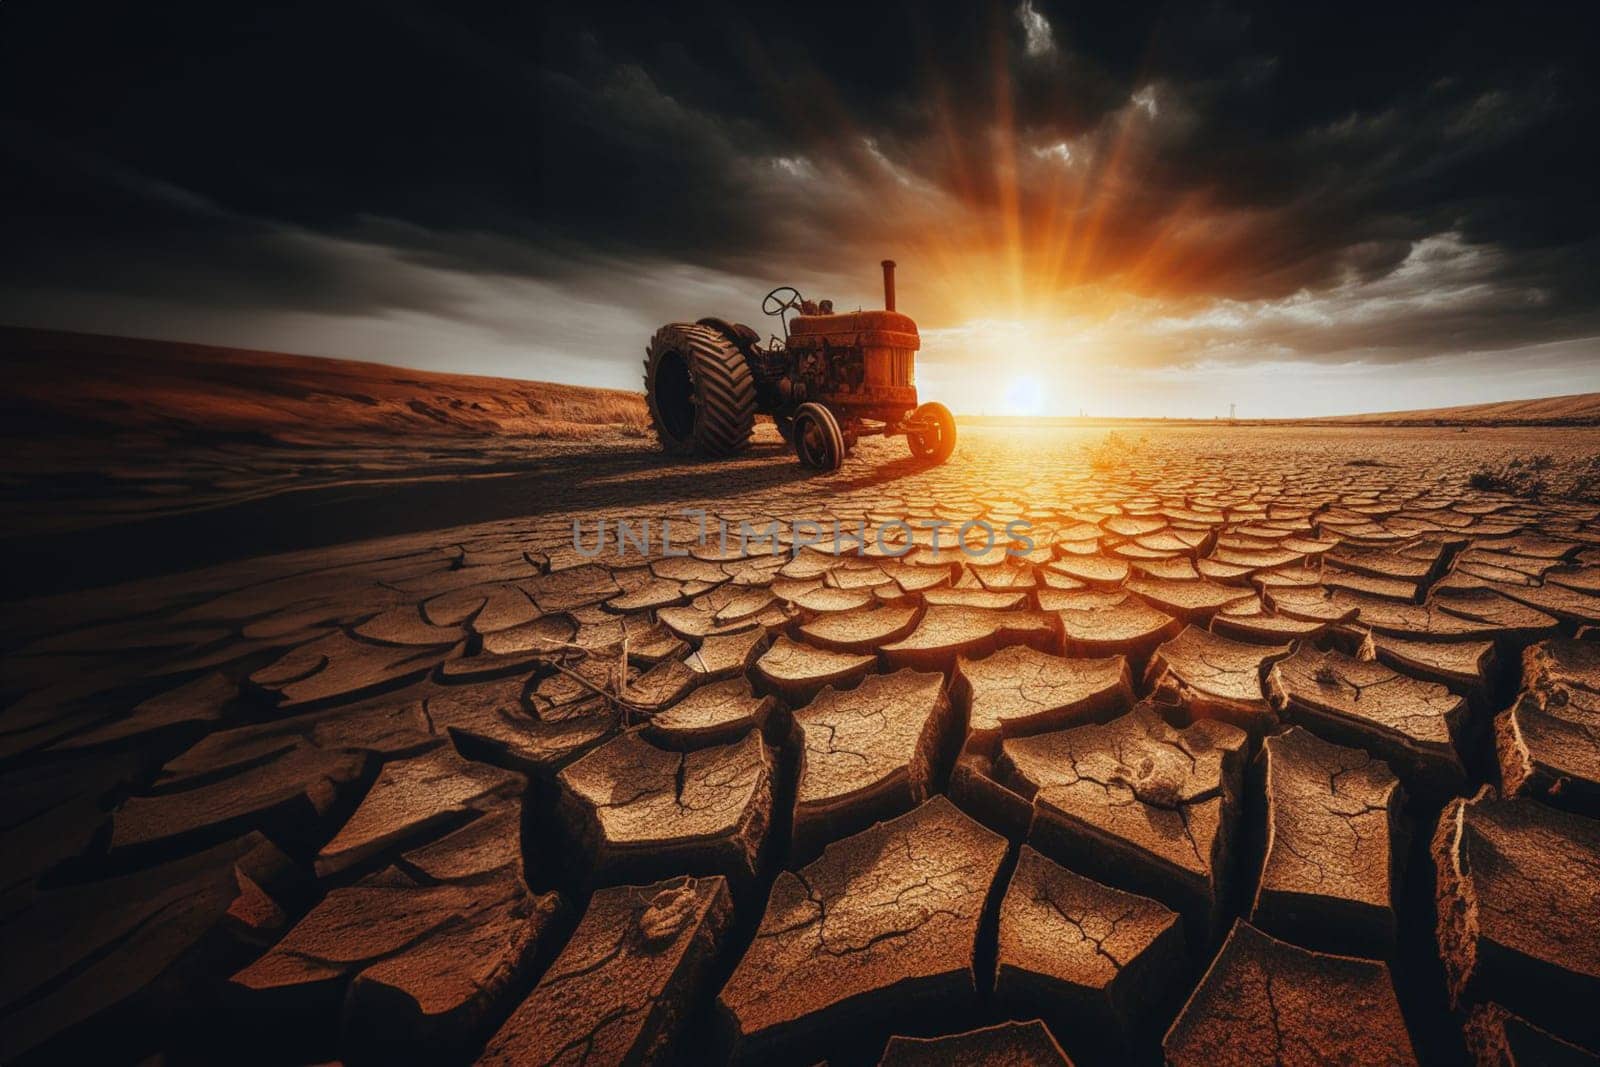 Scorched earth arid soil desert heat wave global warming drought, abandoned rusty tractor, dead animal bones, stormy sky smoking plants factories polluting ambient, apocalyptic scene, ai generated